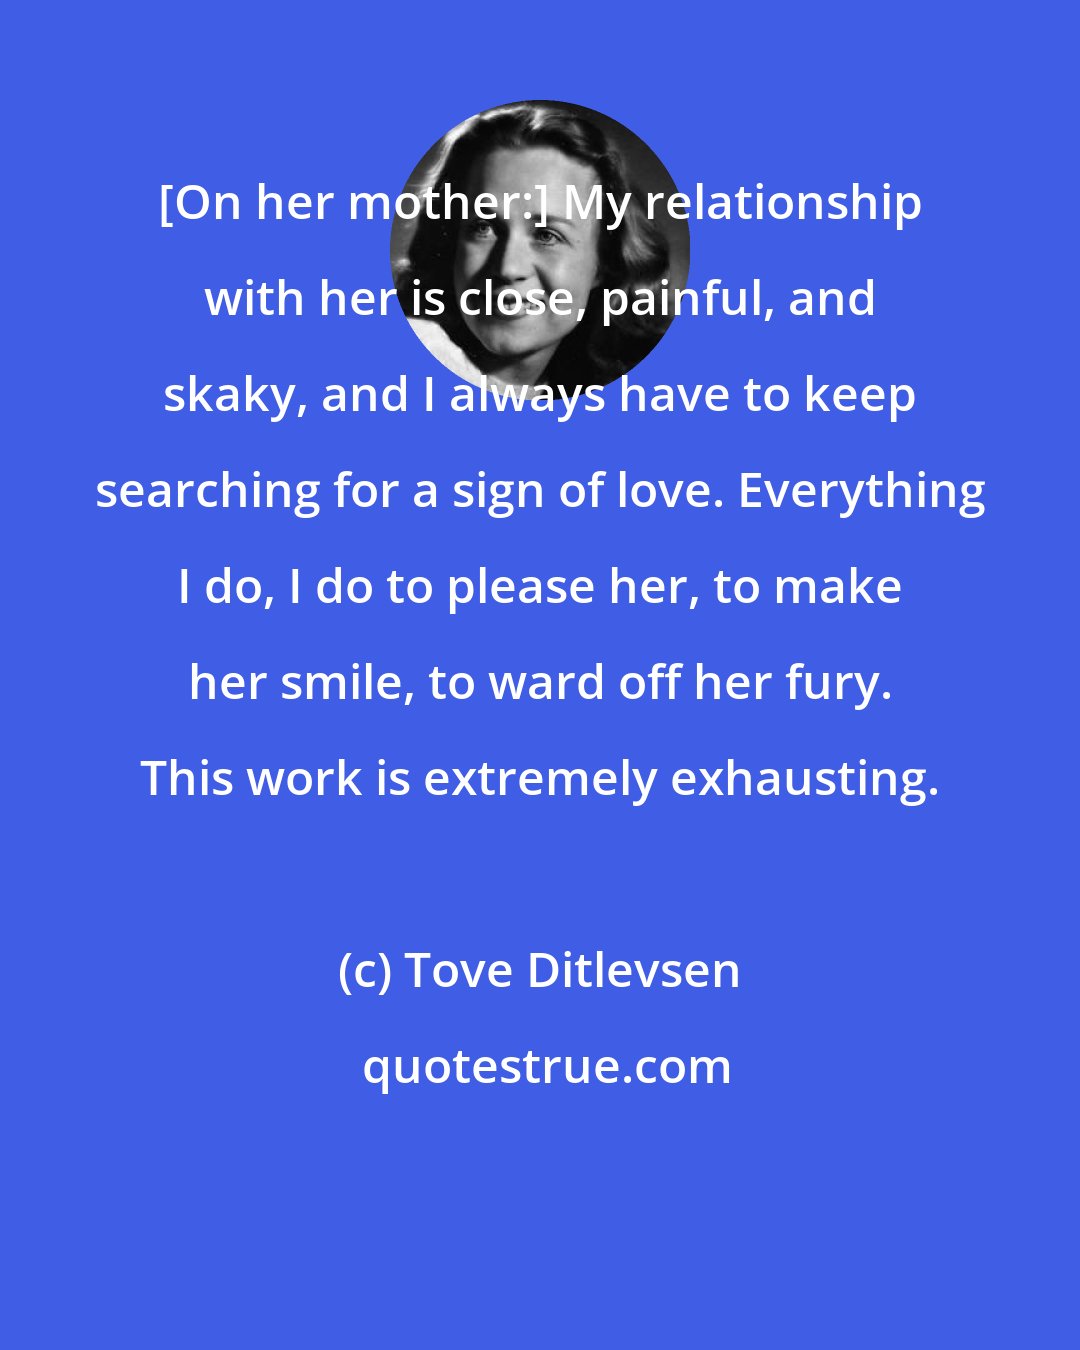 Tove Ditlevsen: [On her mother:] My relationship with her is close, painful, and skaky, and I always have to keep searching for a sign of love. Everything I do, I do to please her, to make her smile, to ward off her fury. This work is extremely exhausting.